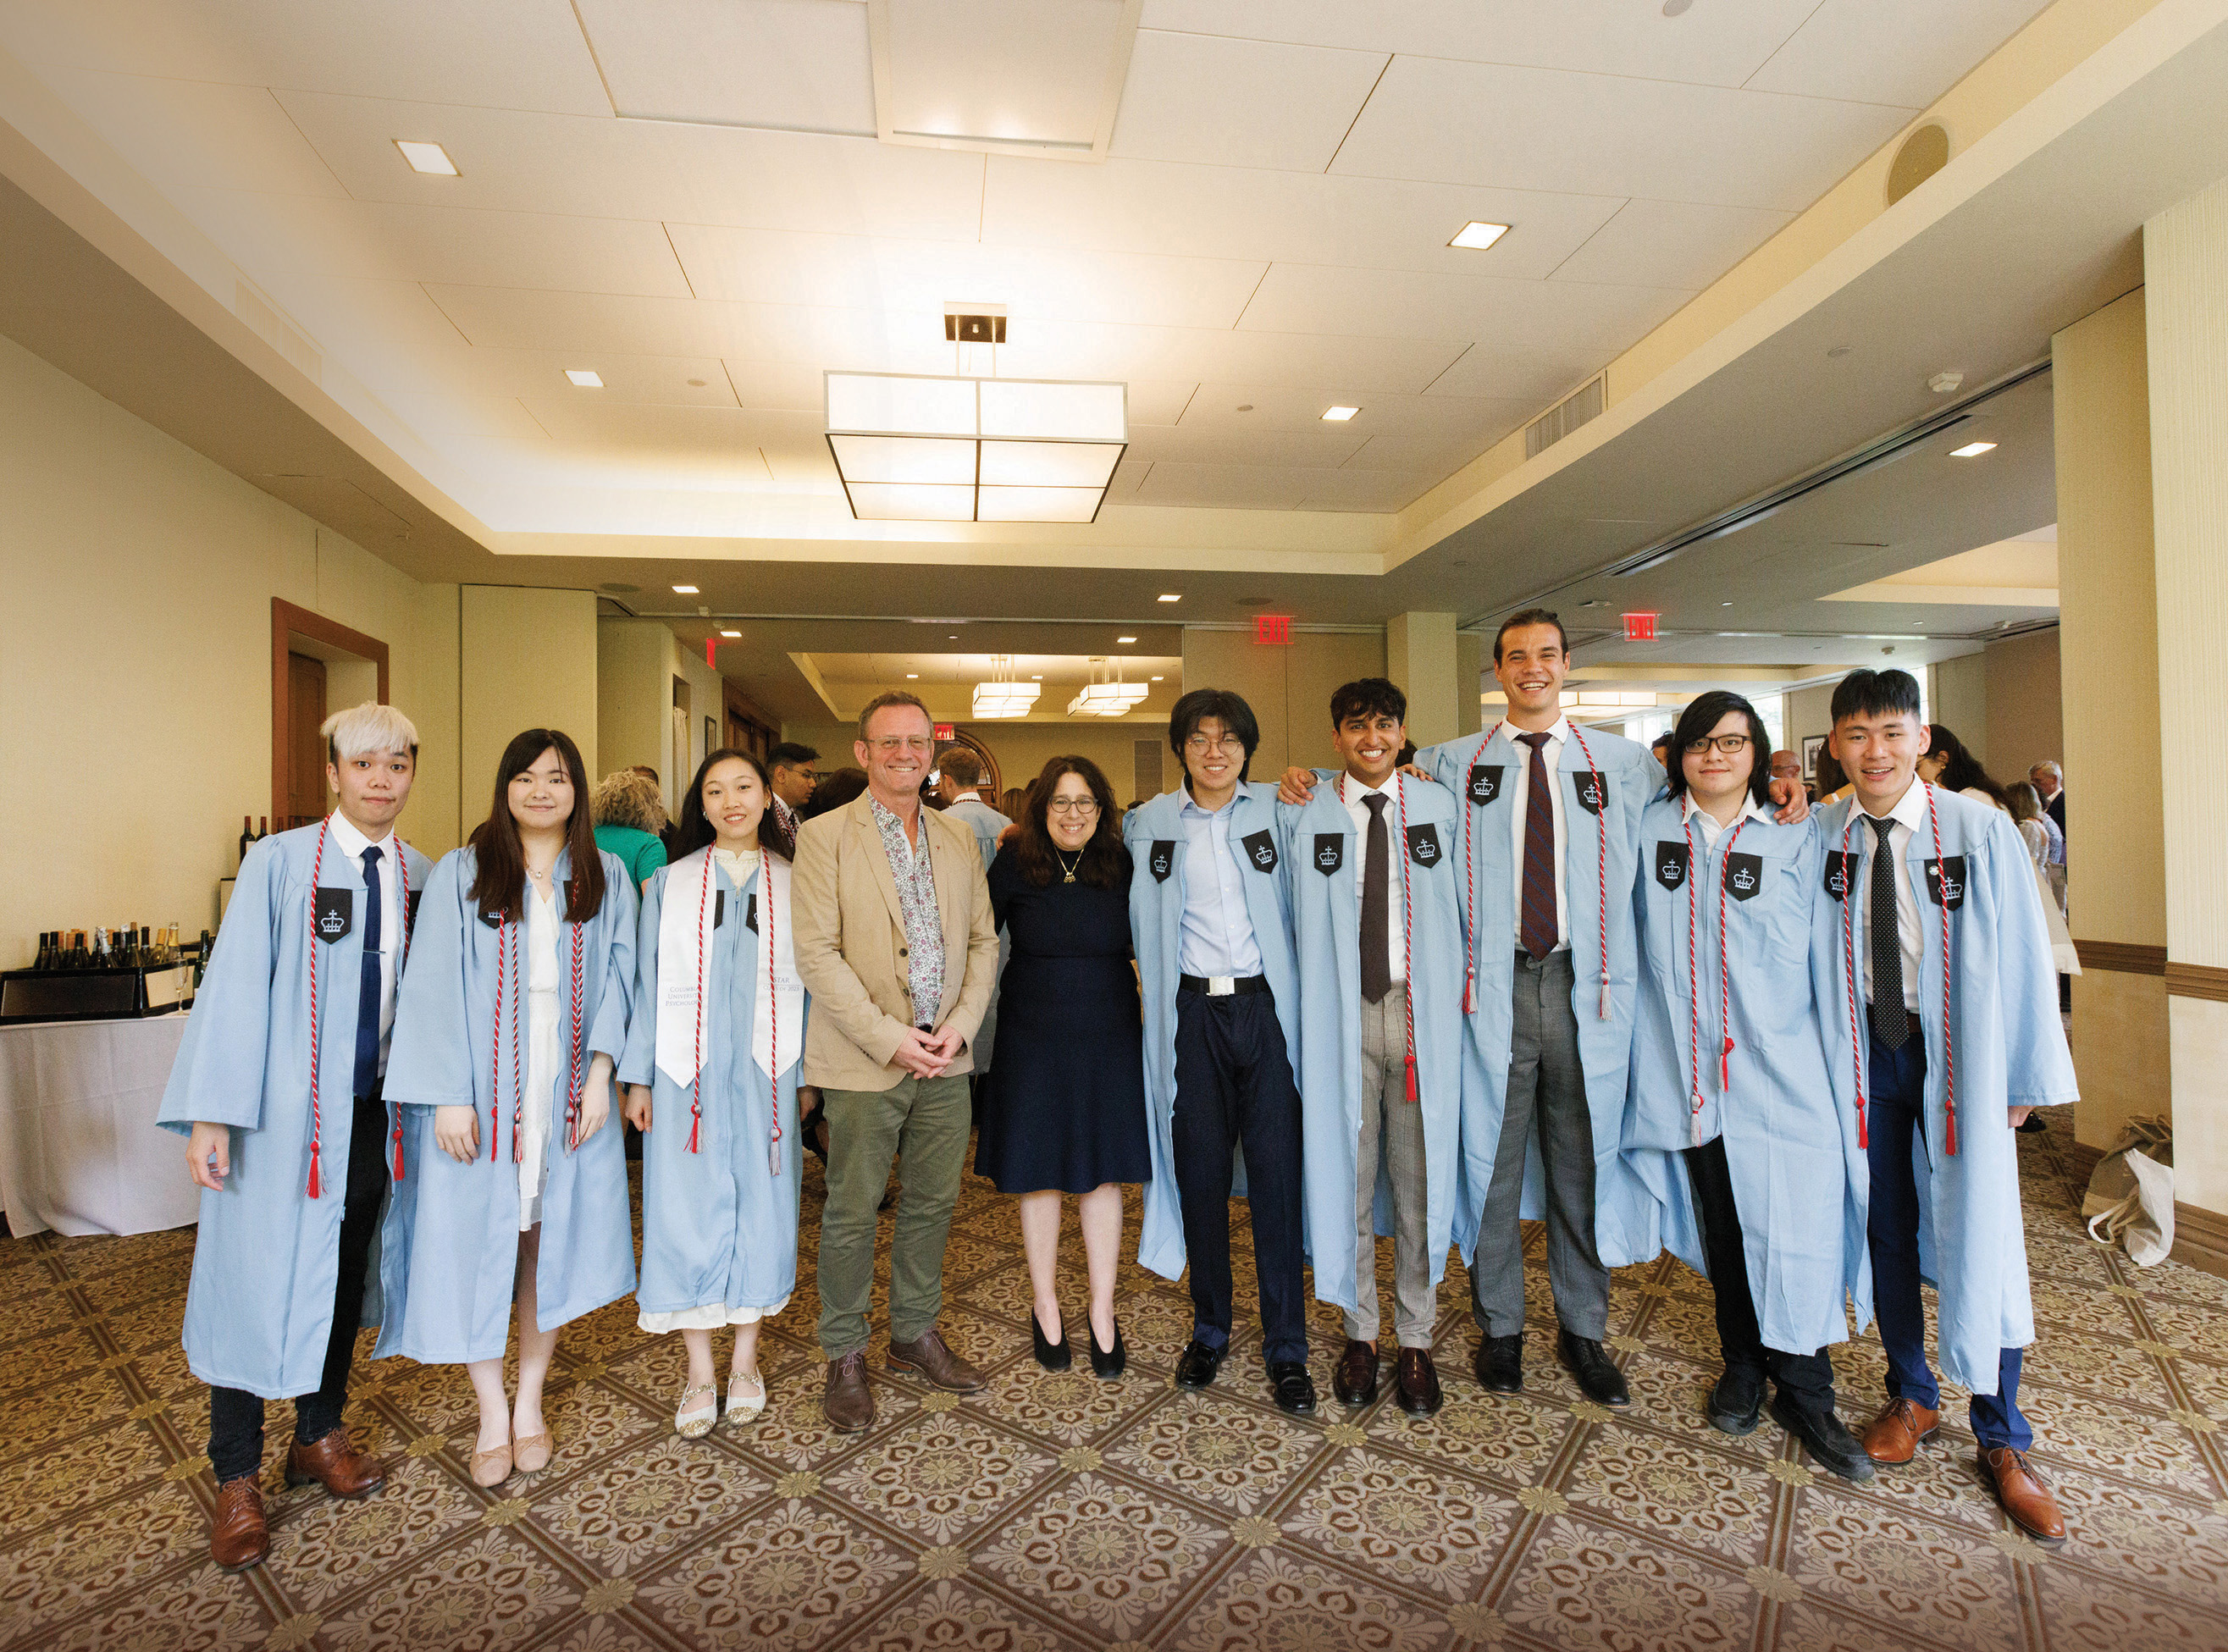 Prof Richard M Walker, Dean of CLASS (fourth from left), greeted the Joint Bachelor’s Degree Program graduates after the Class Day ceremony.